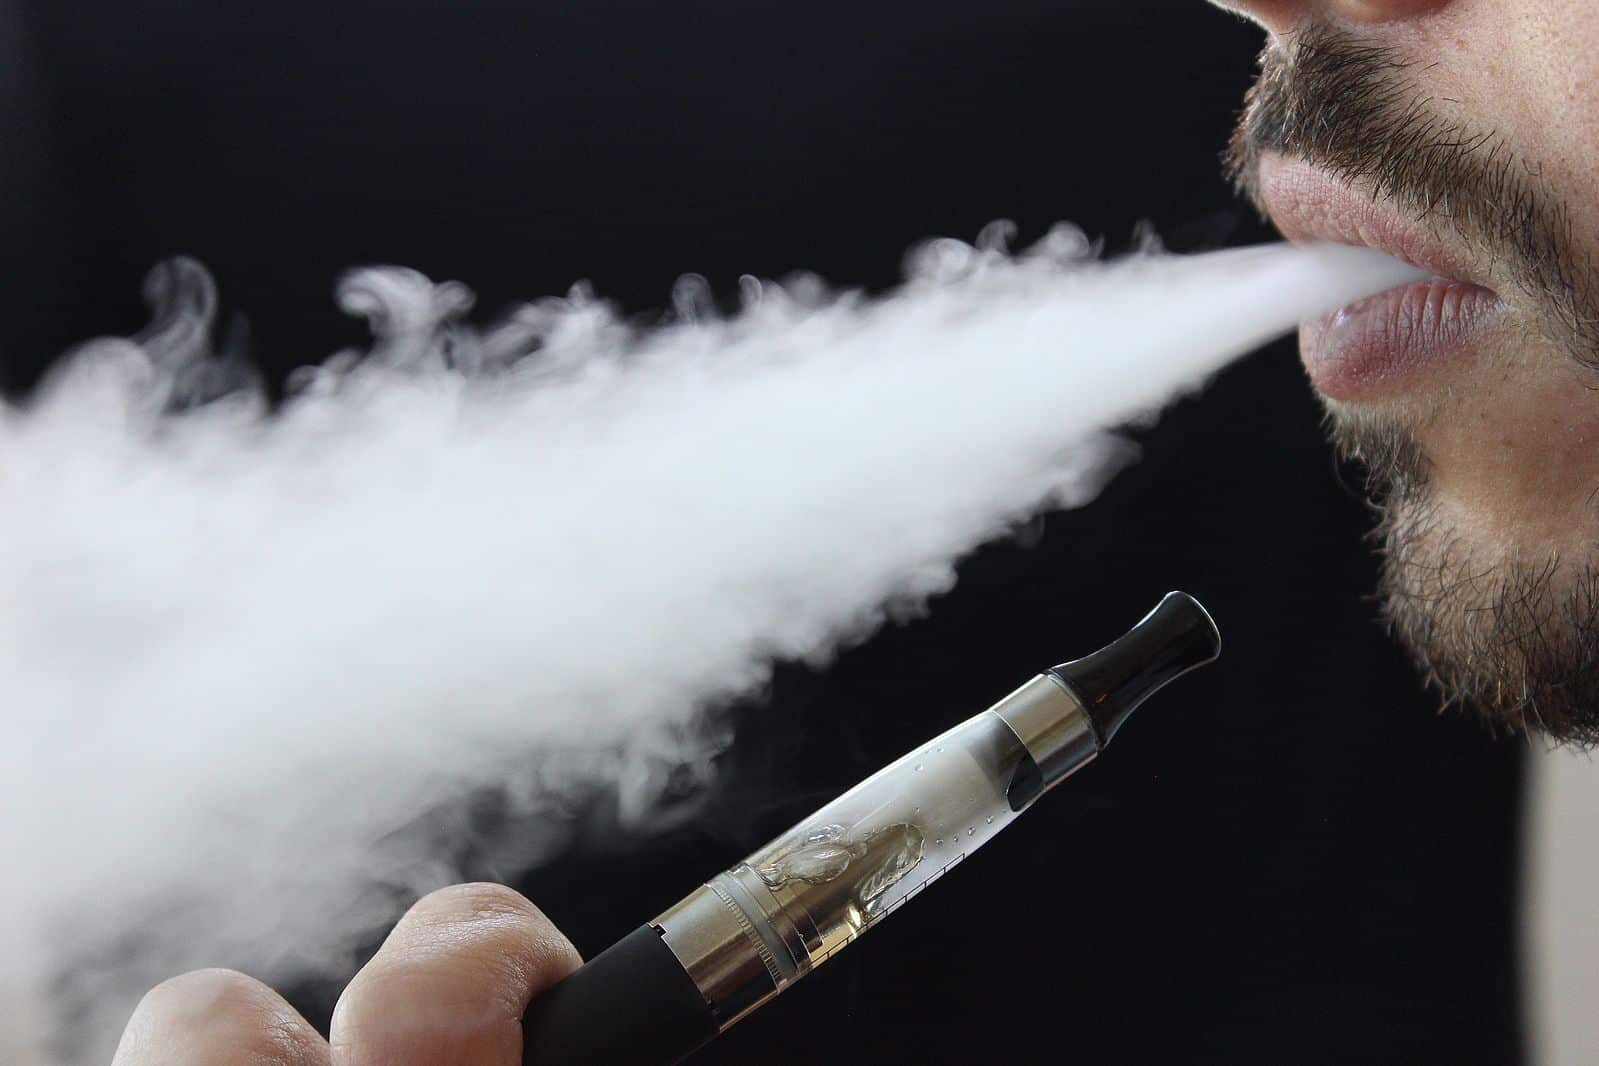  Anti  vaping  PSA contest announced council committee 